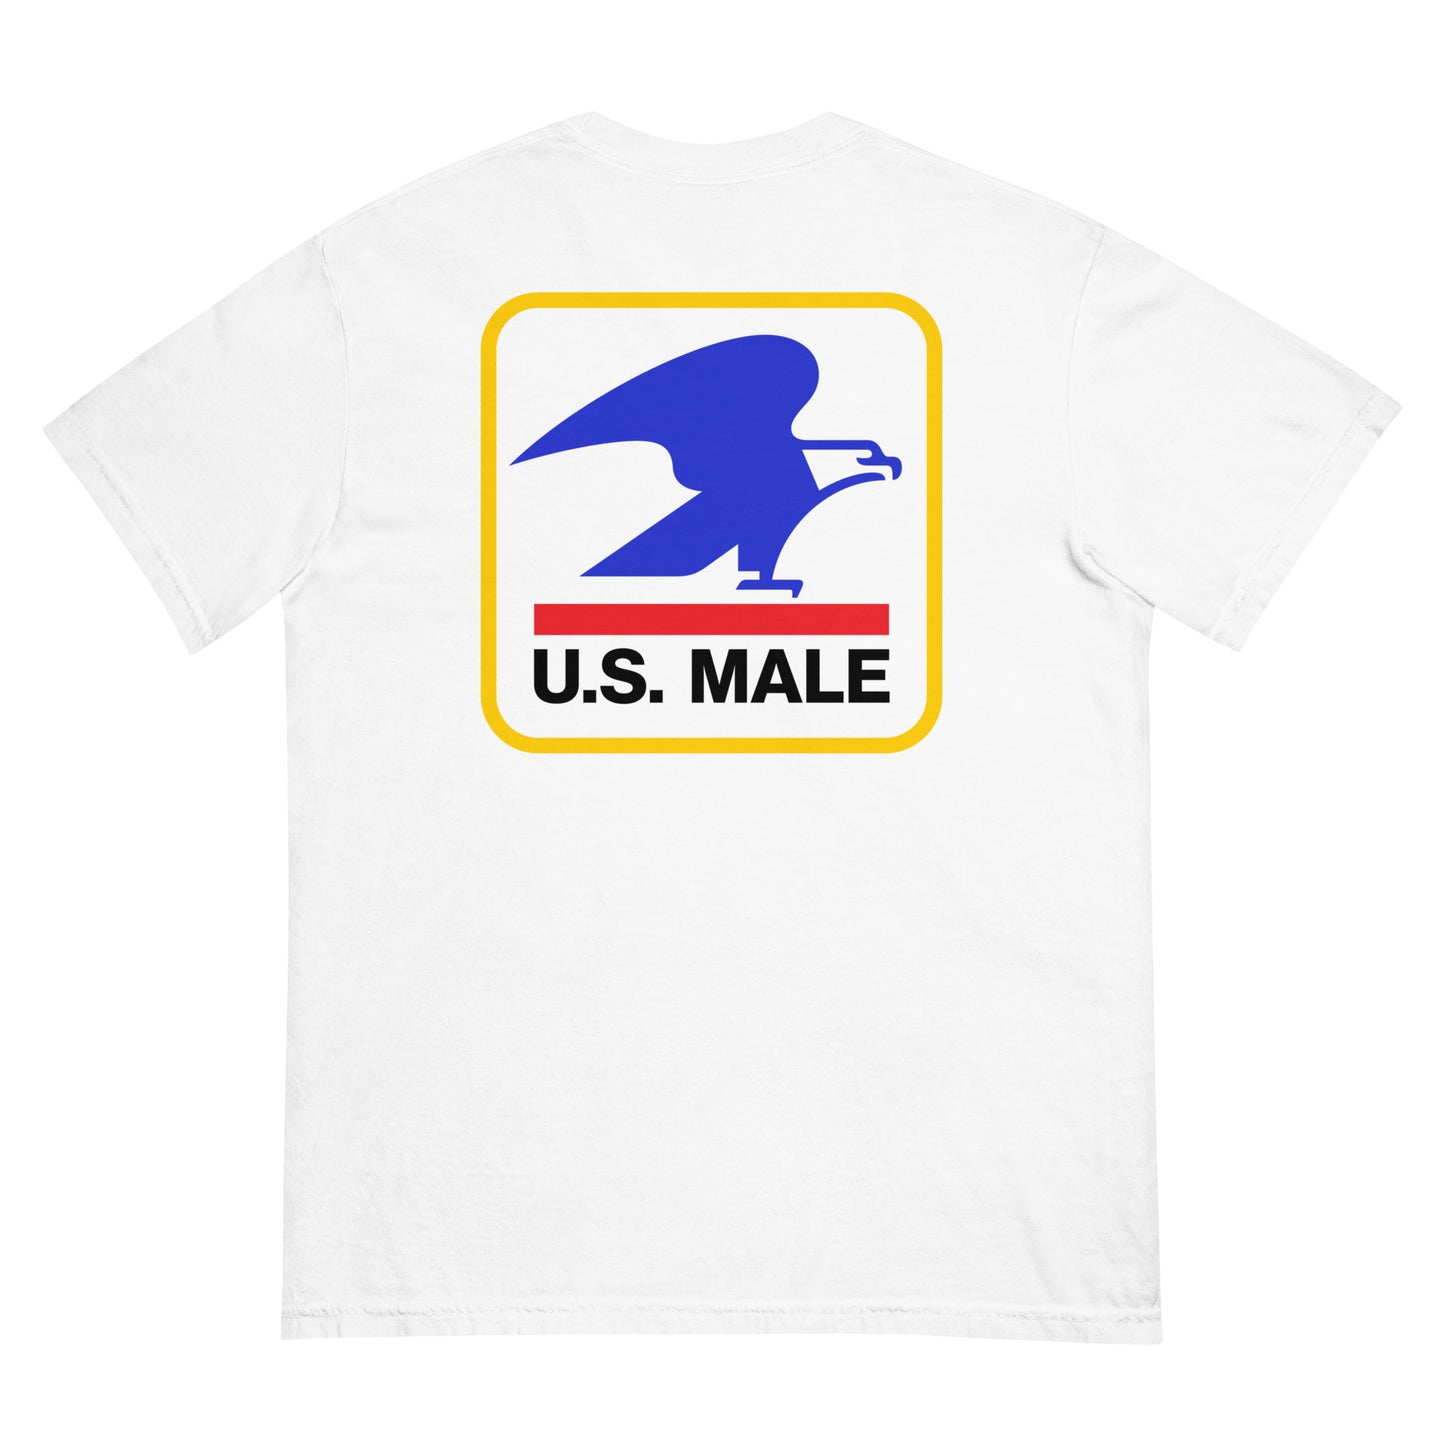 U.S. MALE Front/Back